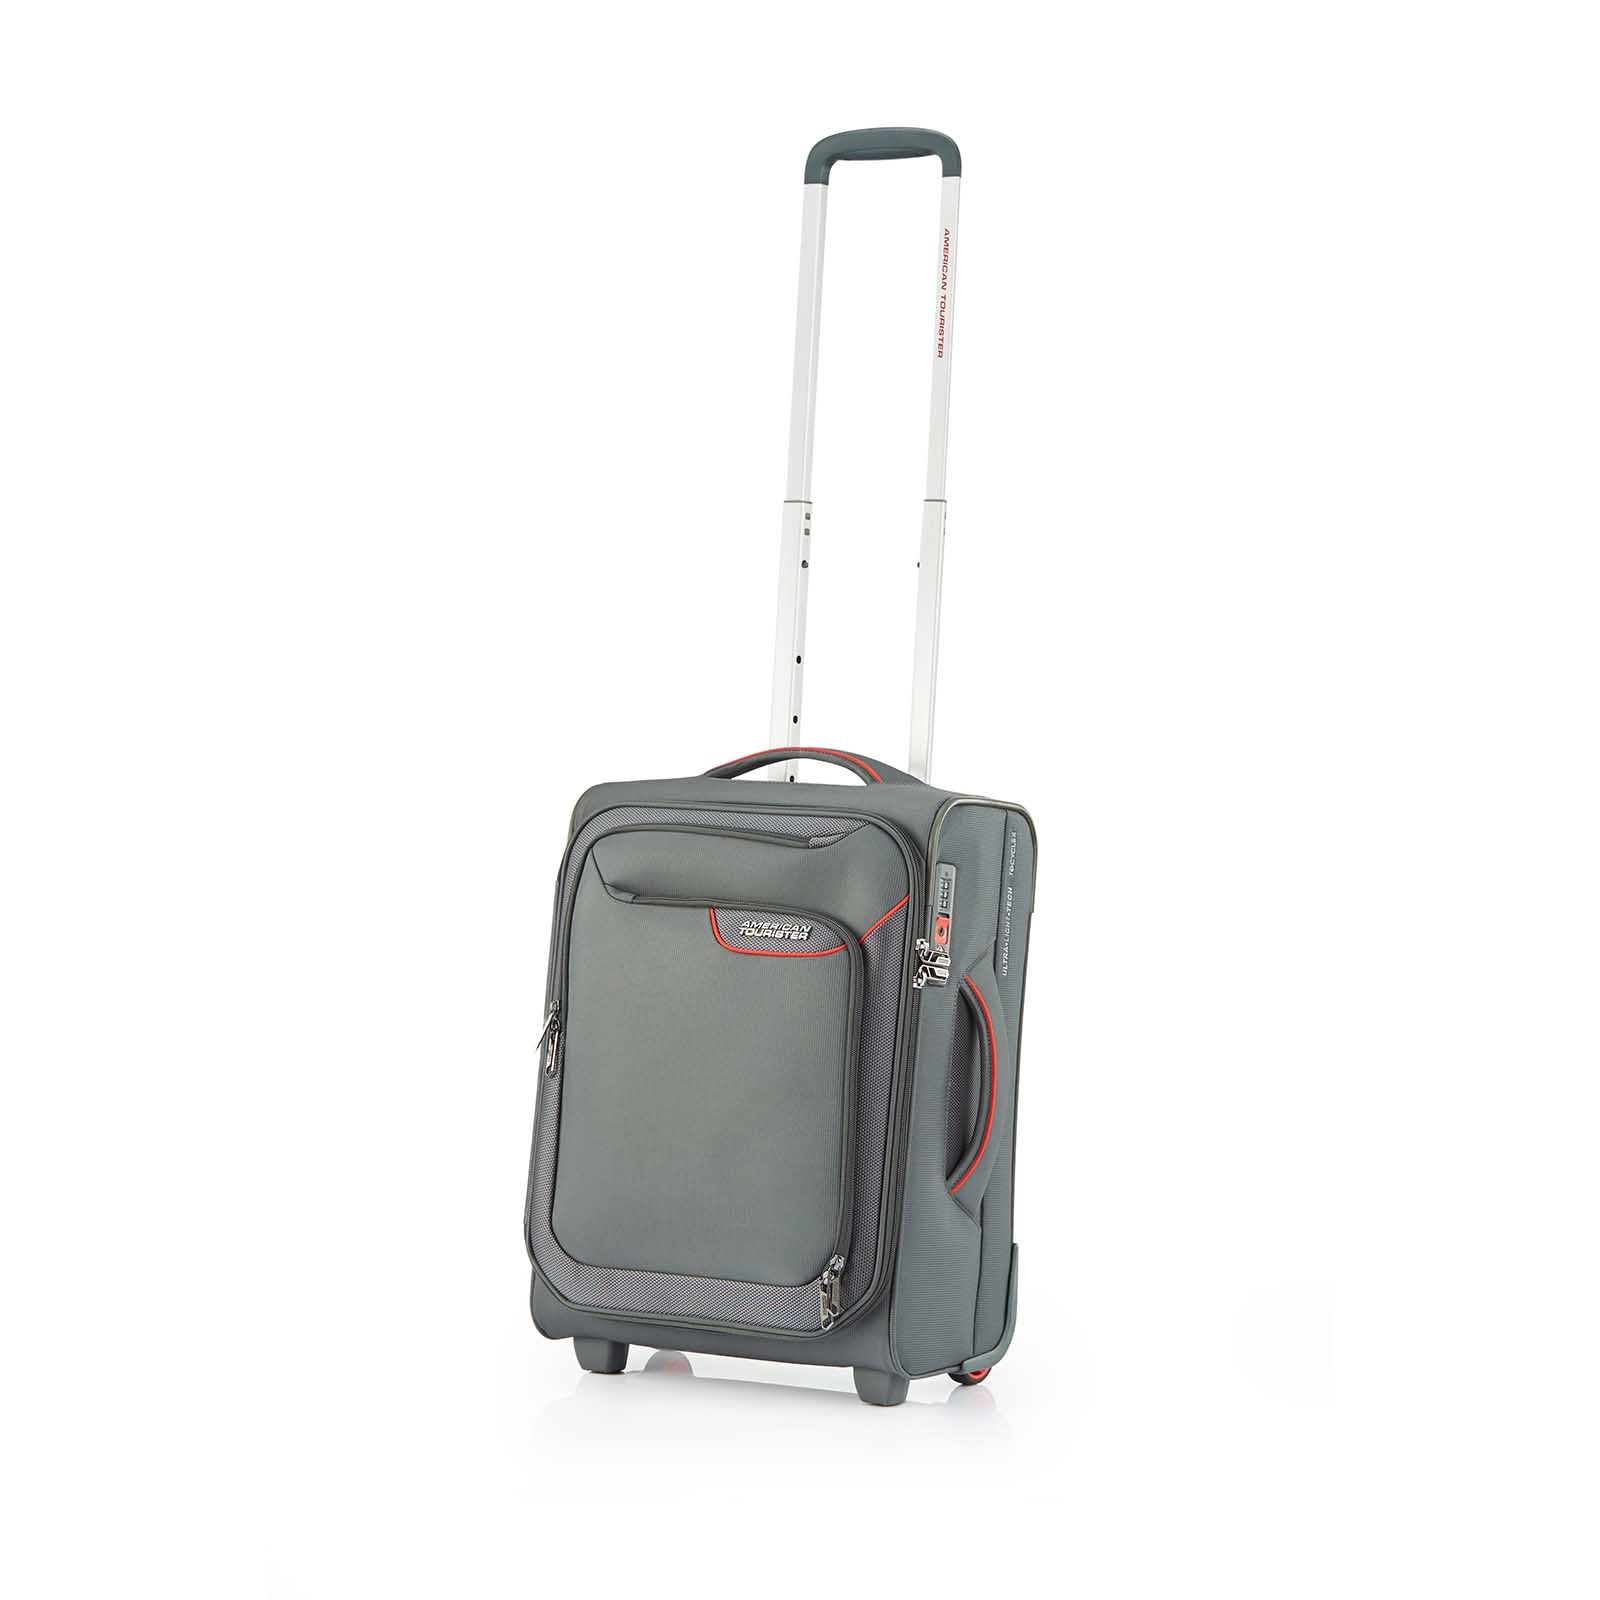 American-Tourister-Applite-4-Eco-50cm-Carry-On-Suitcase-Grey-Red-Front-Angle